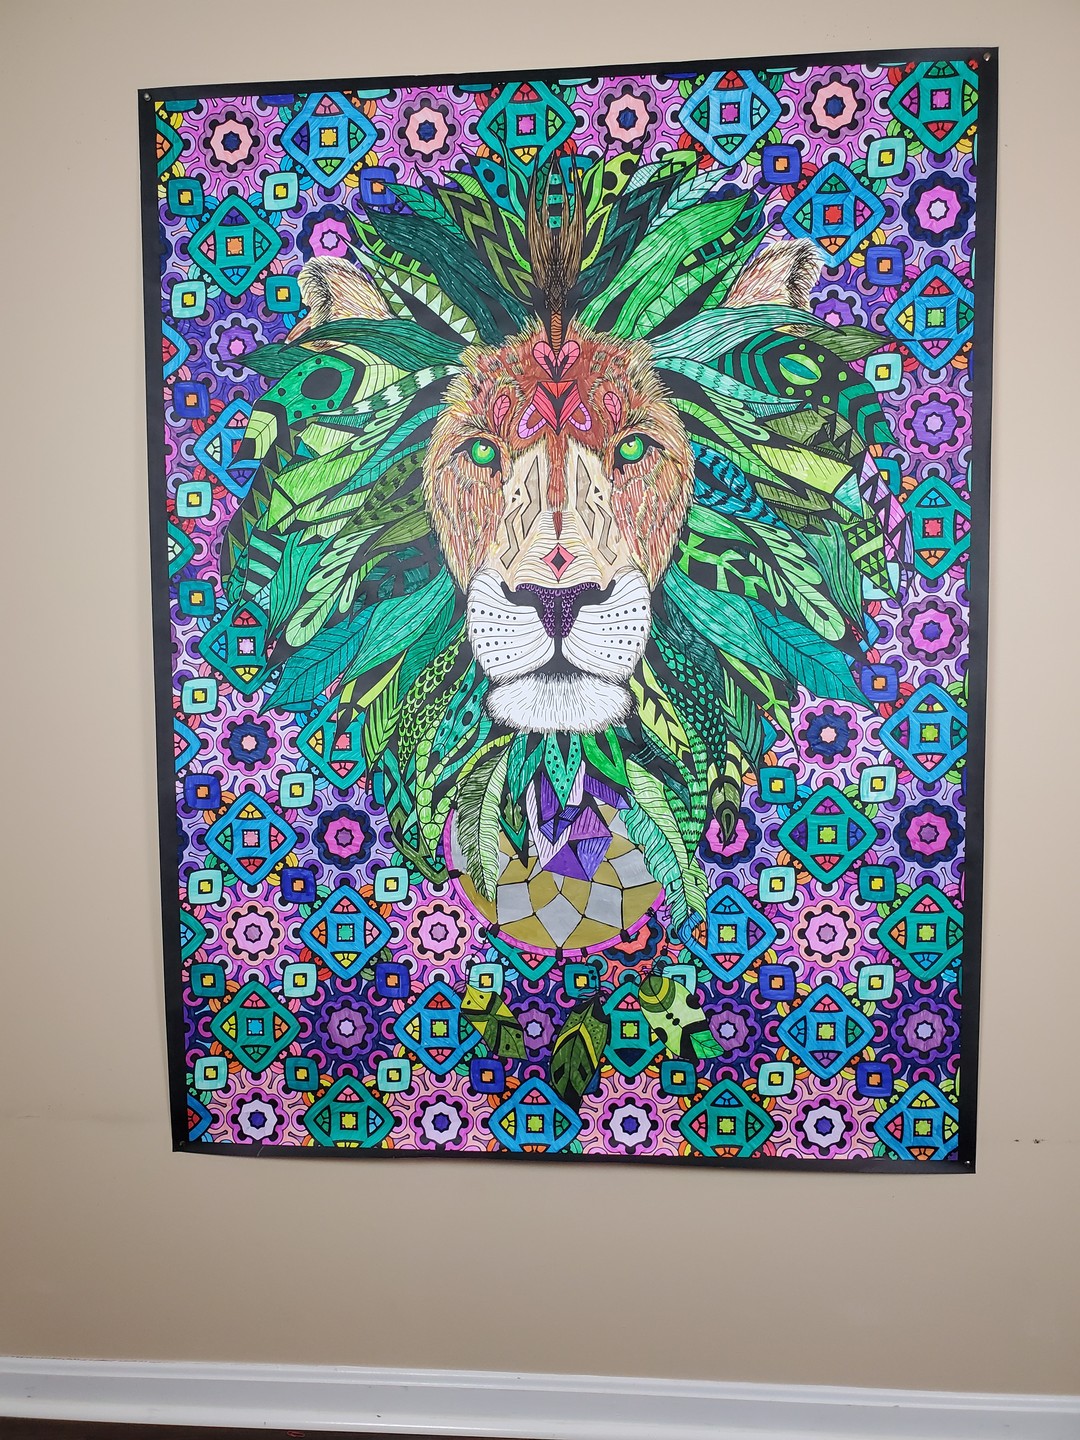 Lion Personalized Giant Coloring Poster 48"x63"